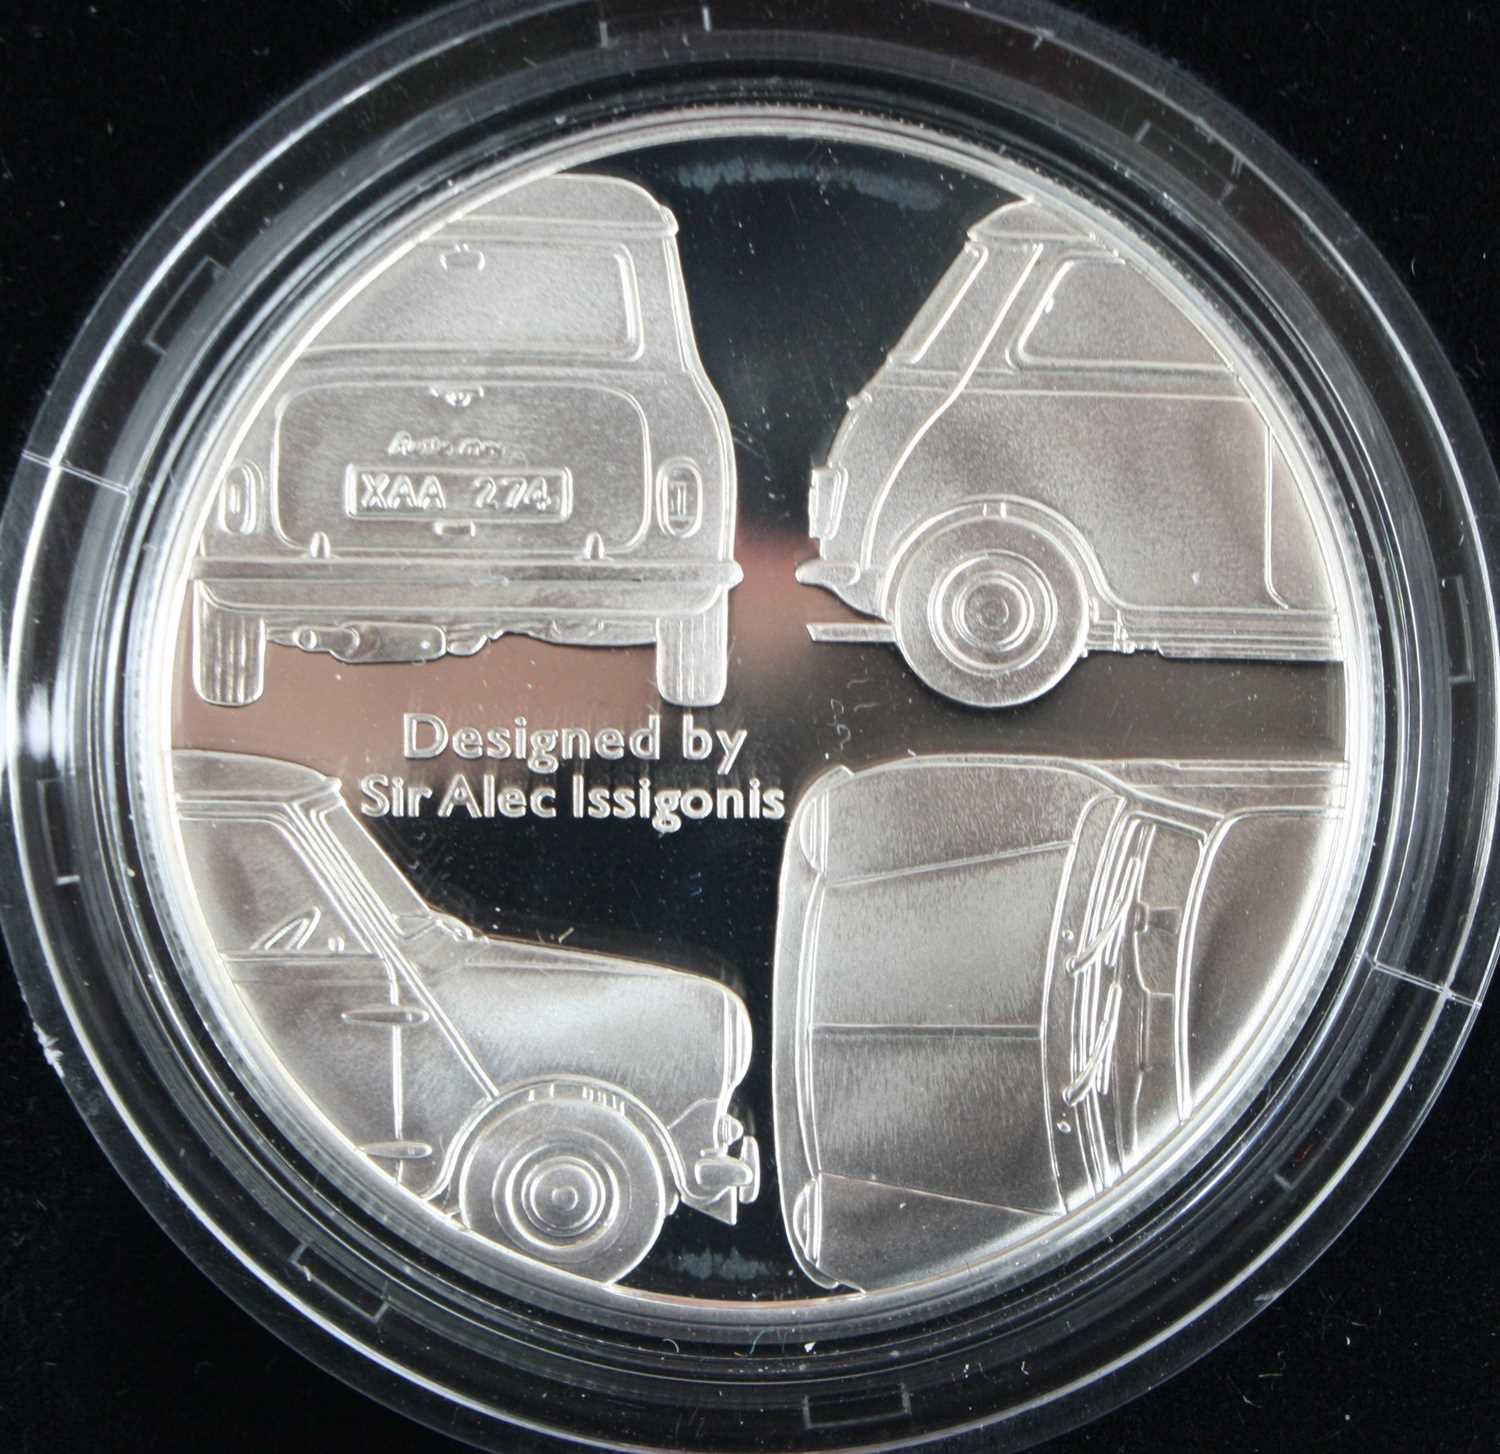 United Kingdom, The Royal Mint The 2009 50th Anniversary of the Mini £5 Four Coin Silver Proof - Image 2 of 2